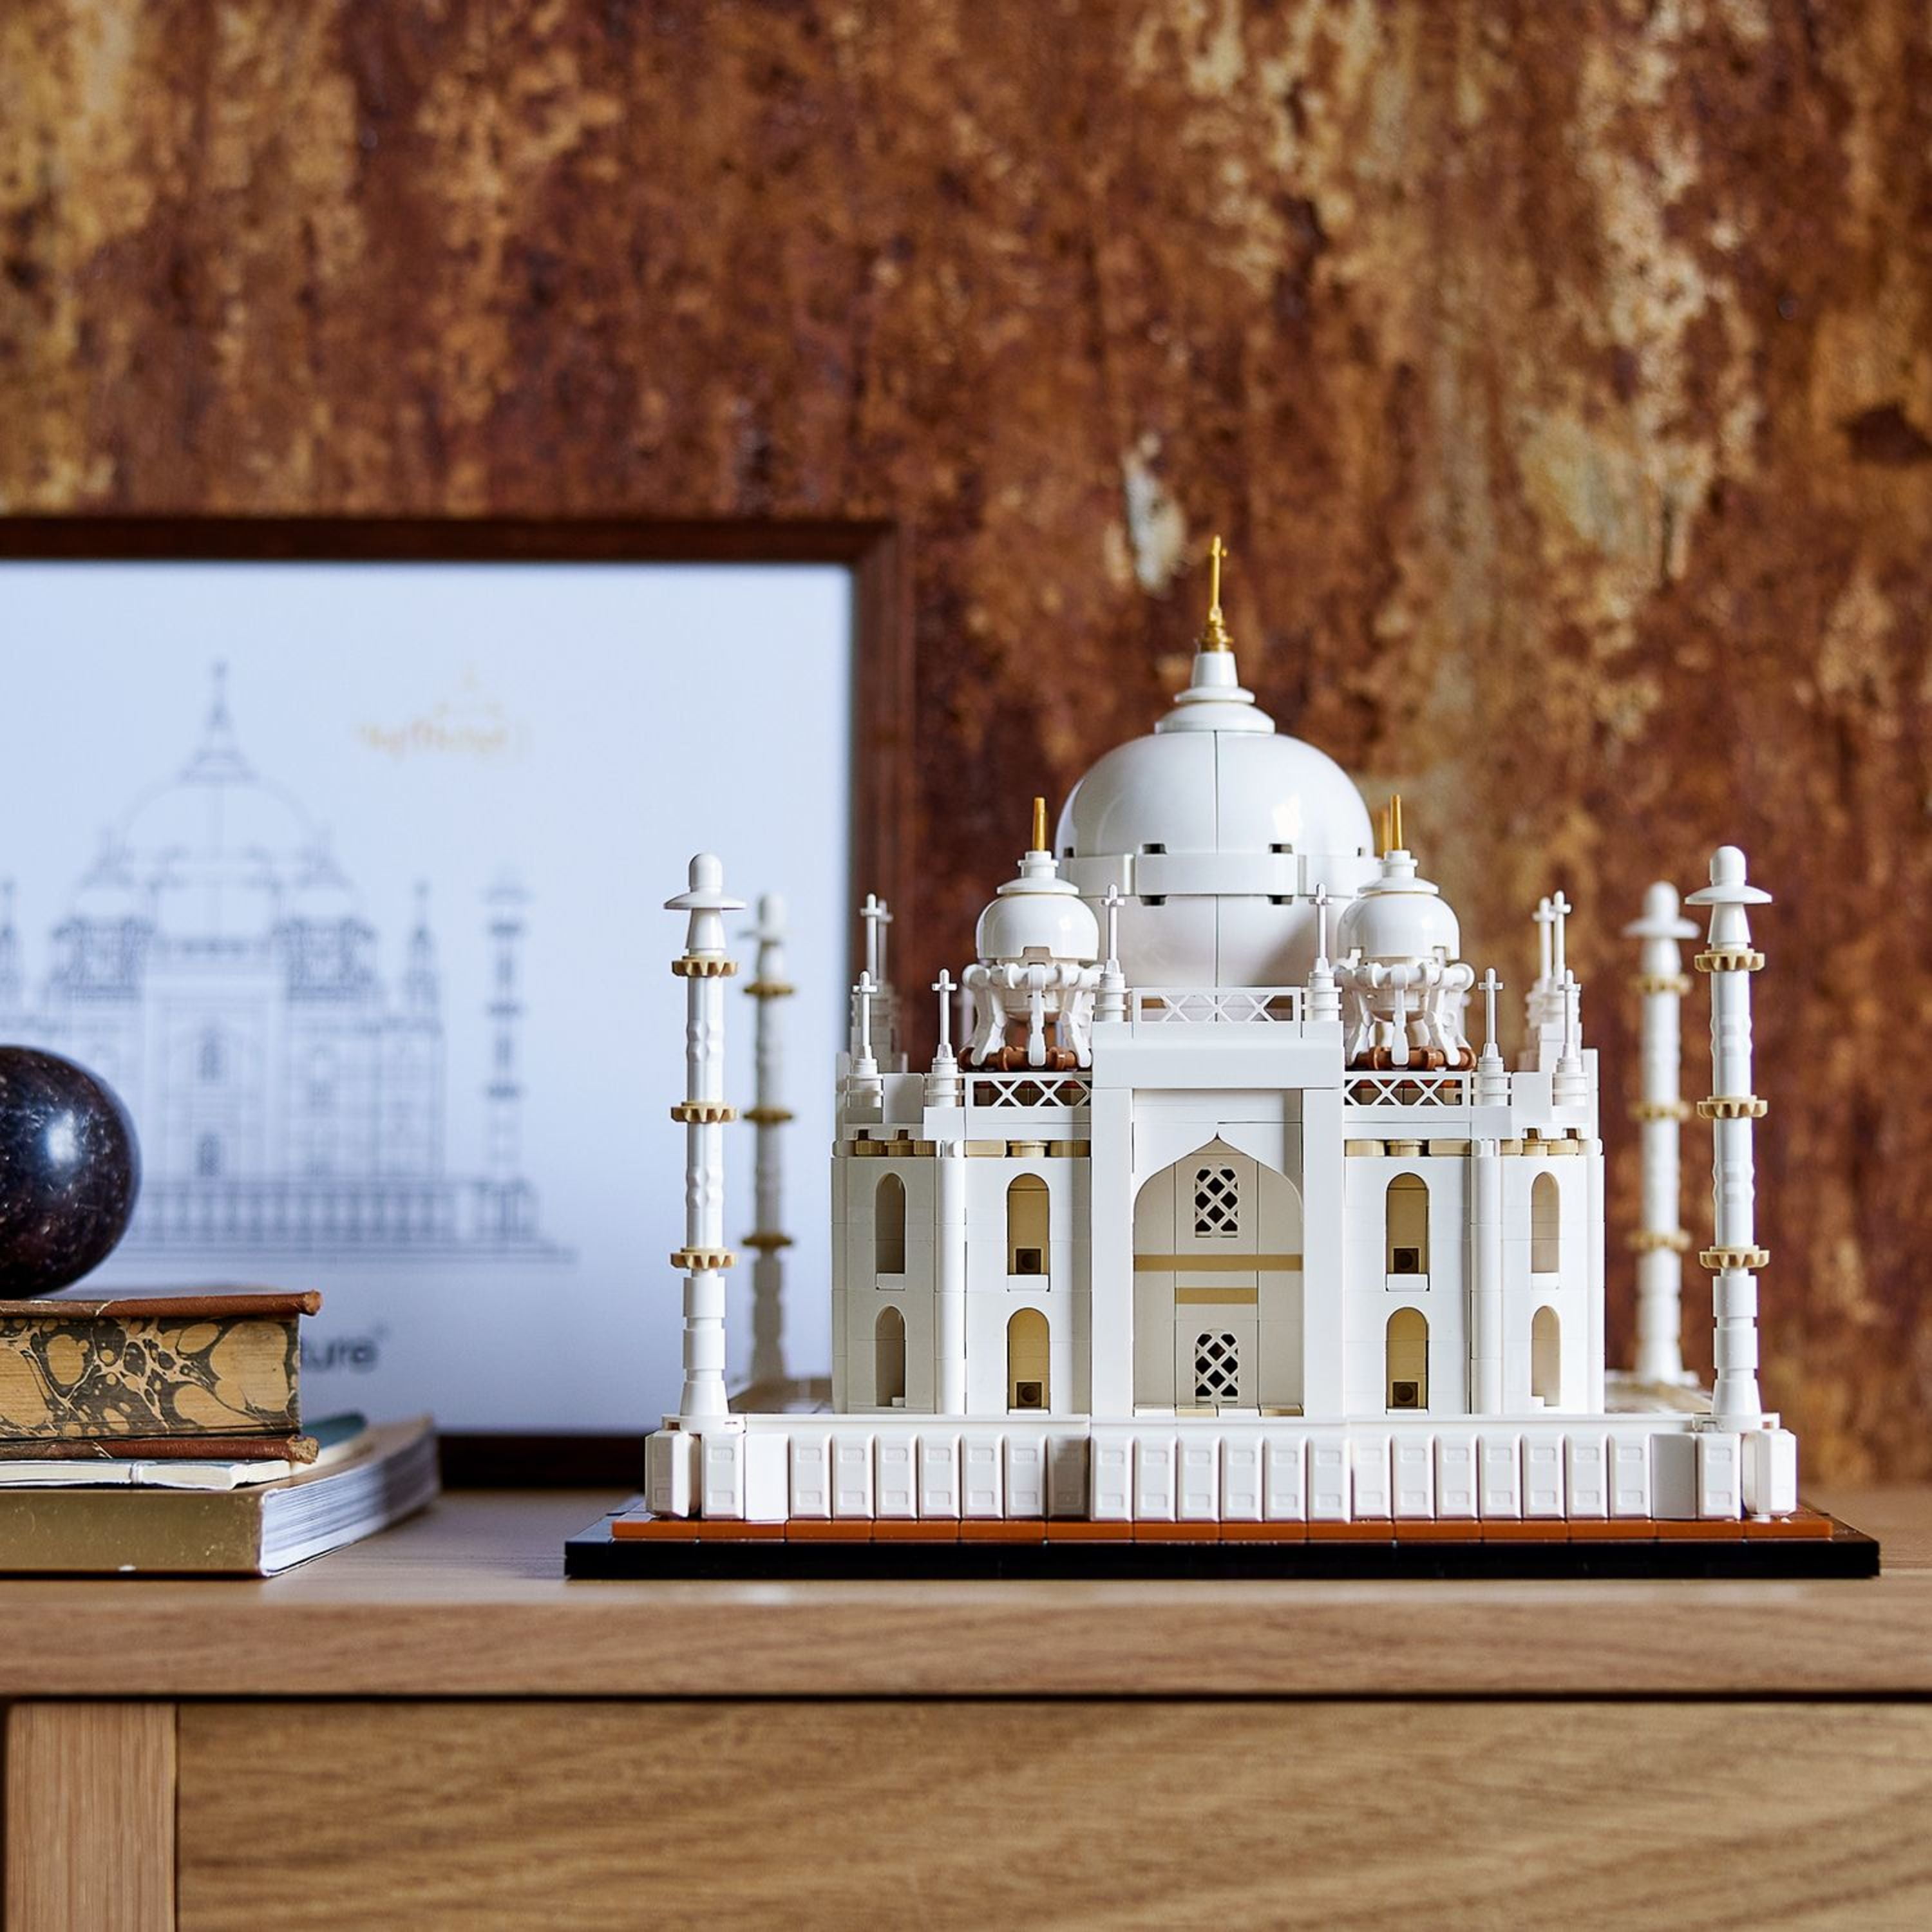 BUILDING THE LEGO TAJ MAHAL SET, One of the largest LEGO sets of all time!  Watch the massive LEGO Taj Mahal with 5923 pieces come together. (🎥  AustrianLegoFan